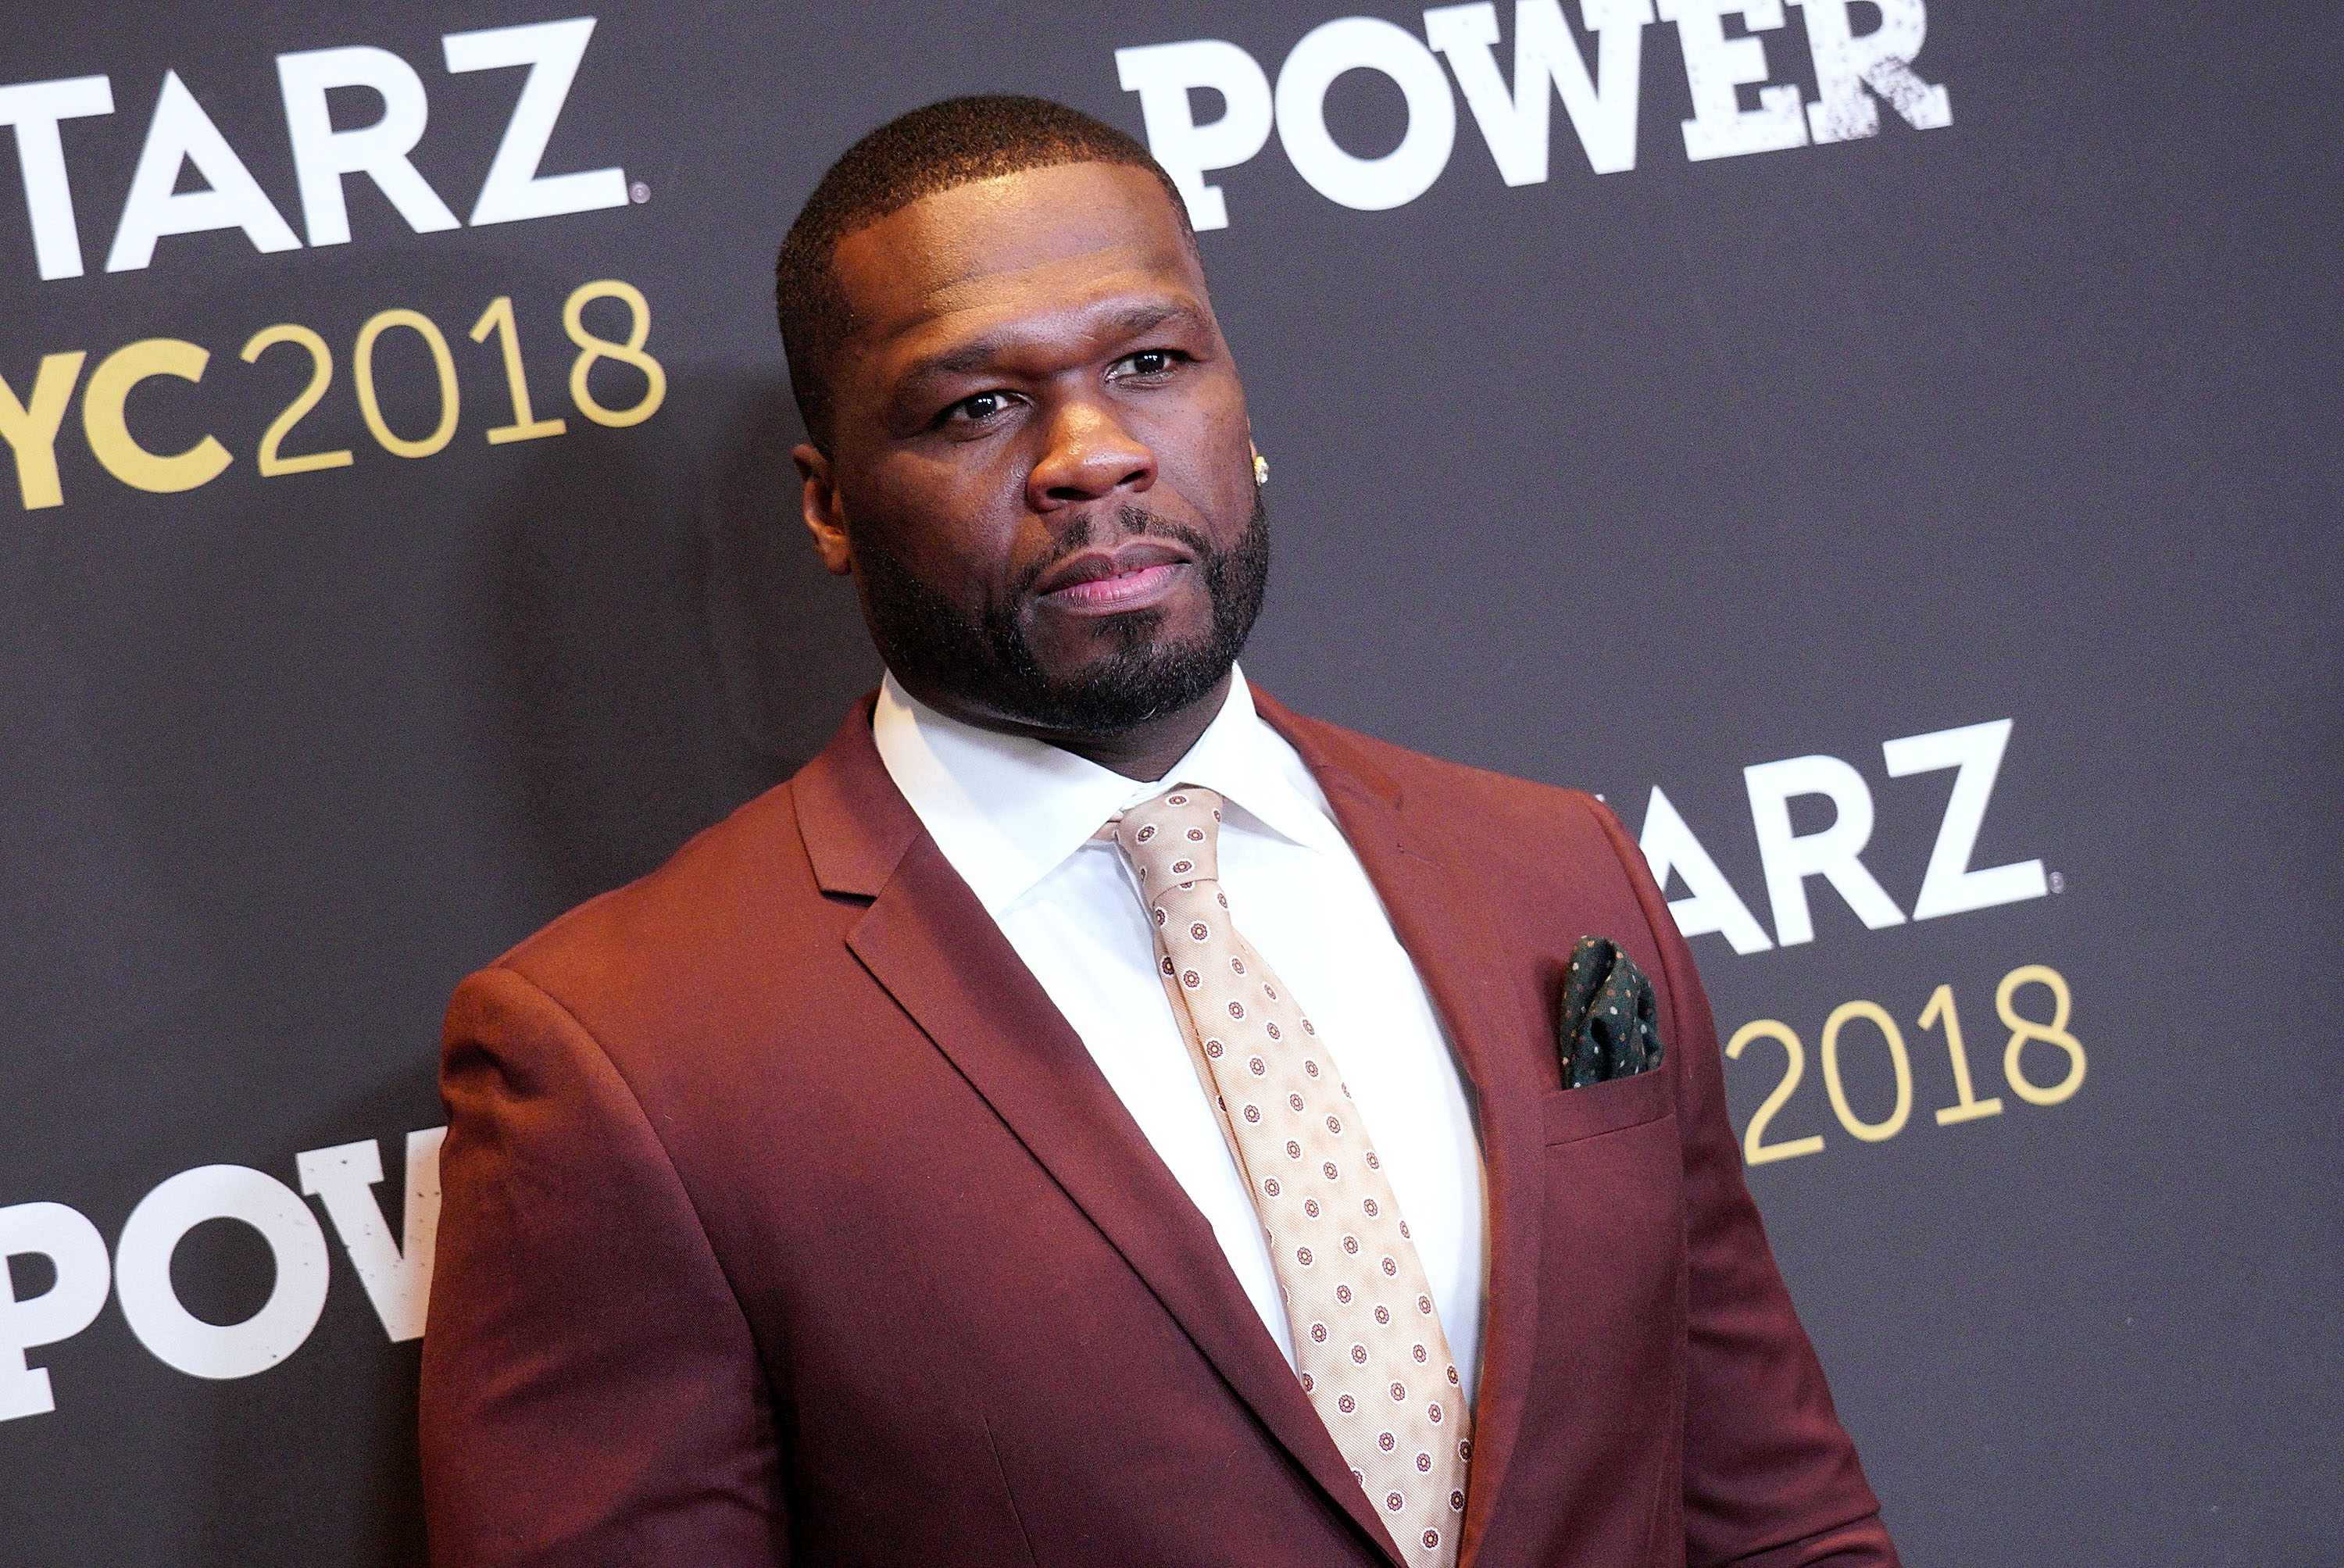 50 Cent To Star In Horror Film, “Skill House,” From Director Josh Stolberg